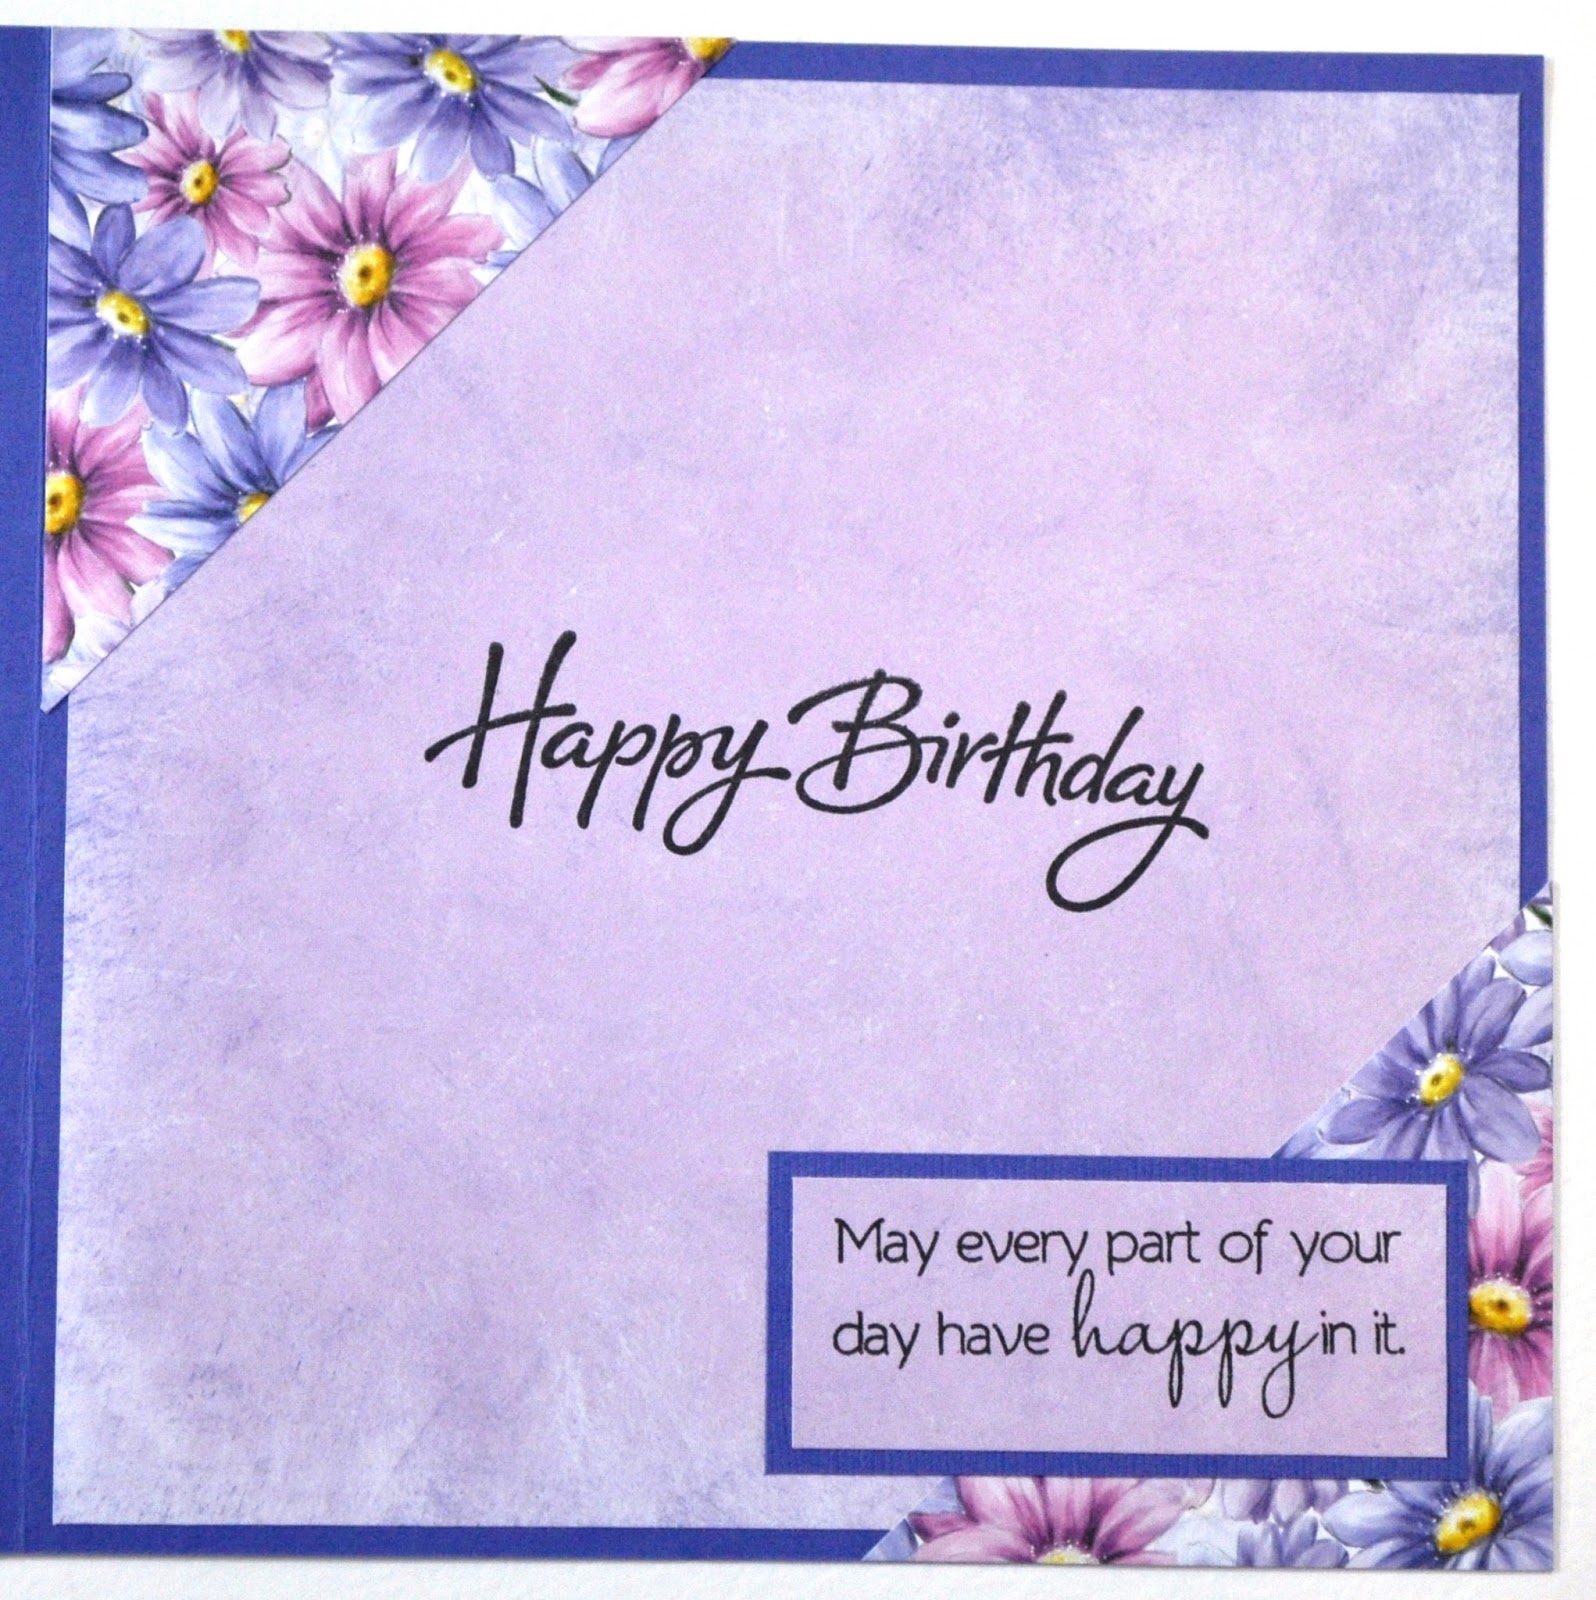 DAT'S My Style: Amy's 15th Birthday Card